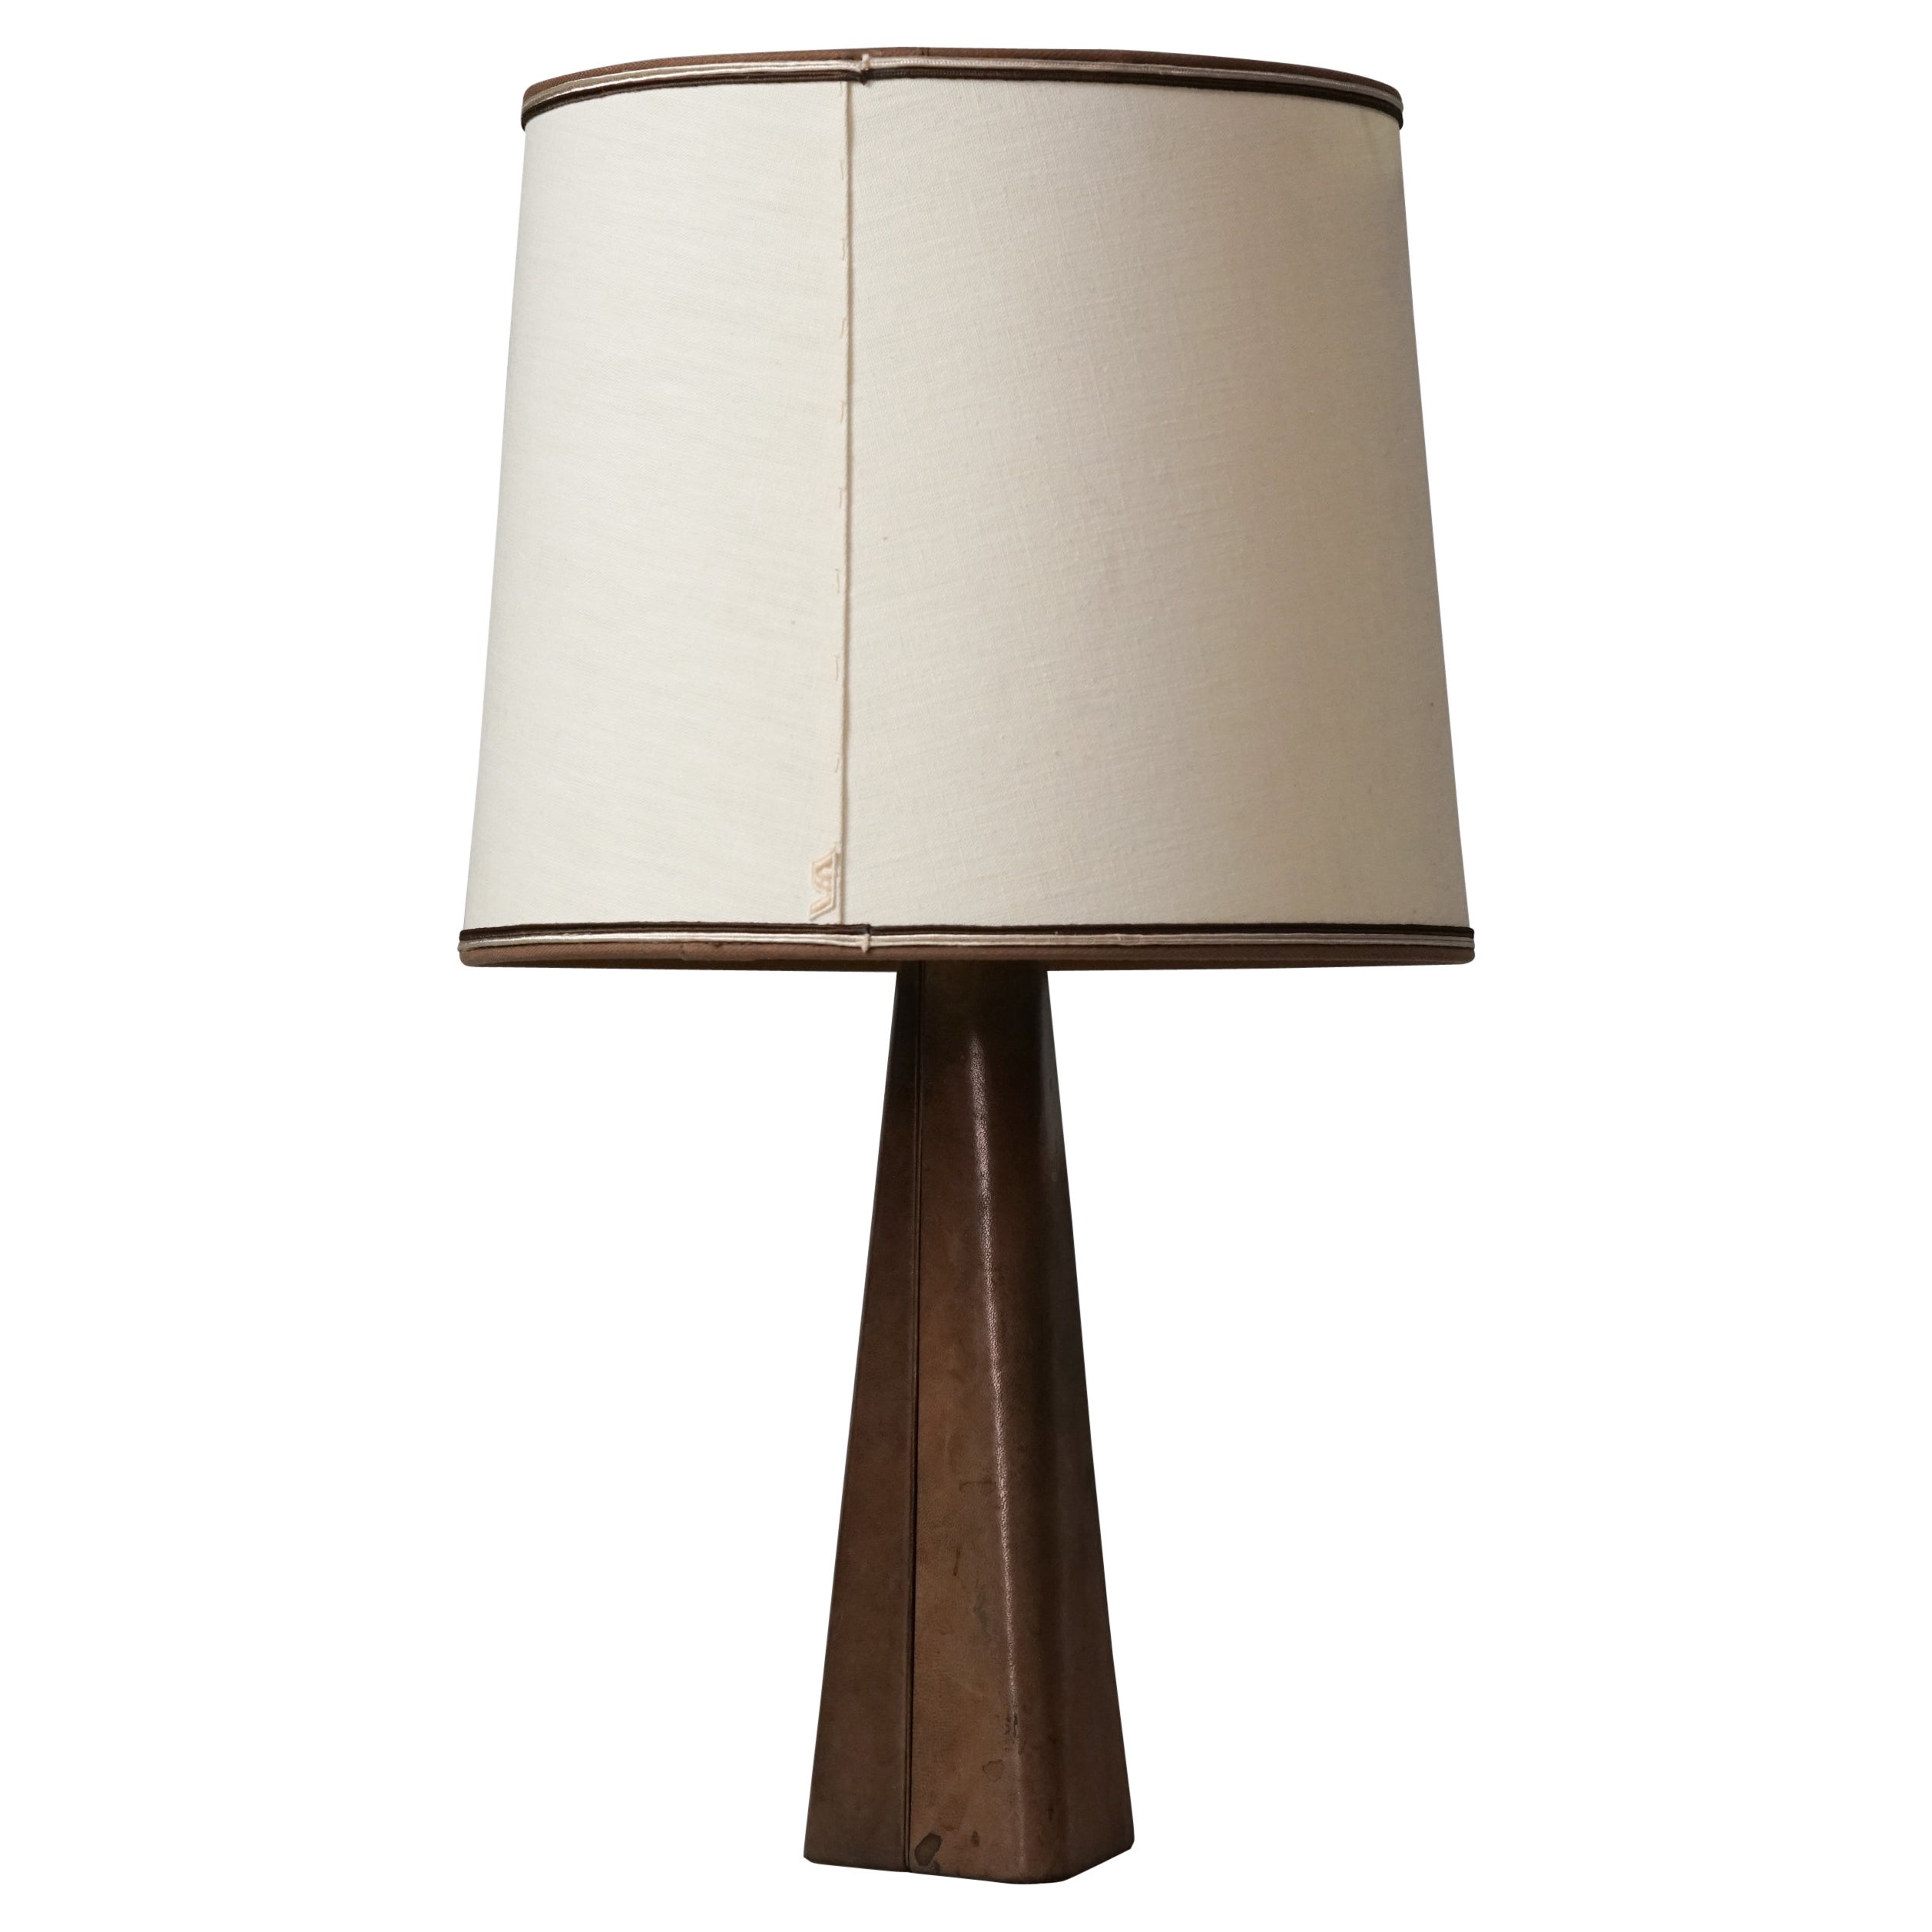 Leather Table Lamp, Lisa Johansson-Pape, Orno Oy, 1950s For Sale